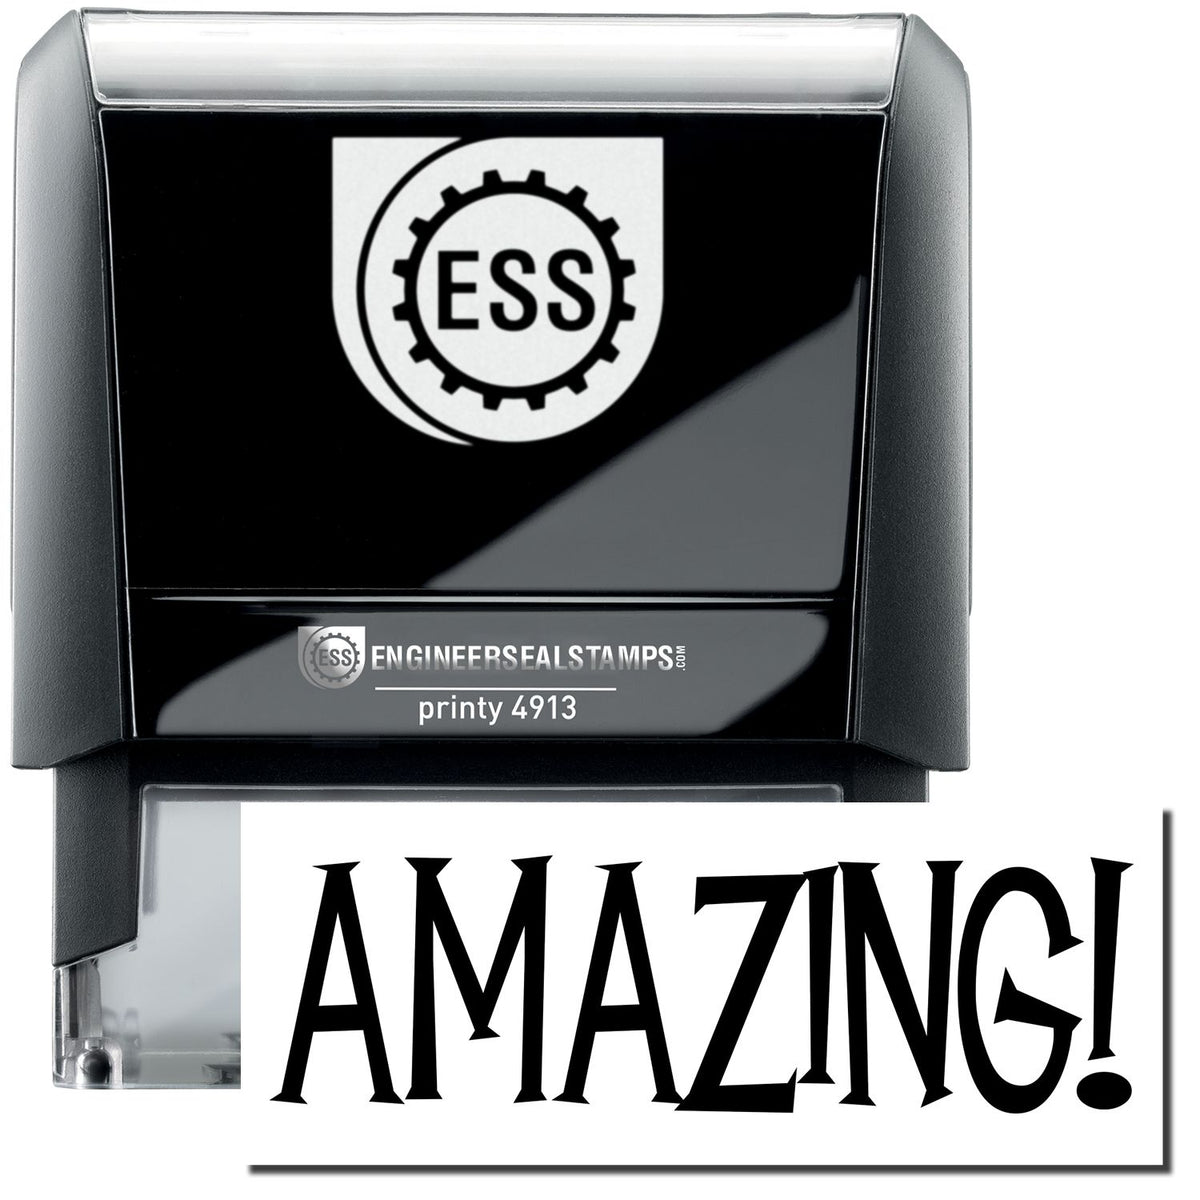 A self-inking stamp with a stamped image showing how the text &quot;AMAZING!&quot; in a unique large bold font is displayed by it.